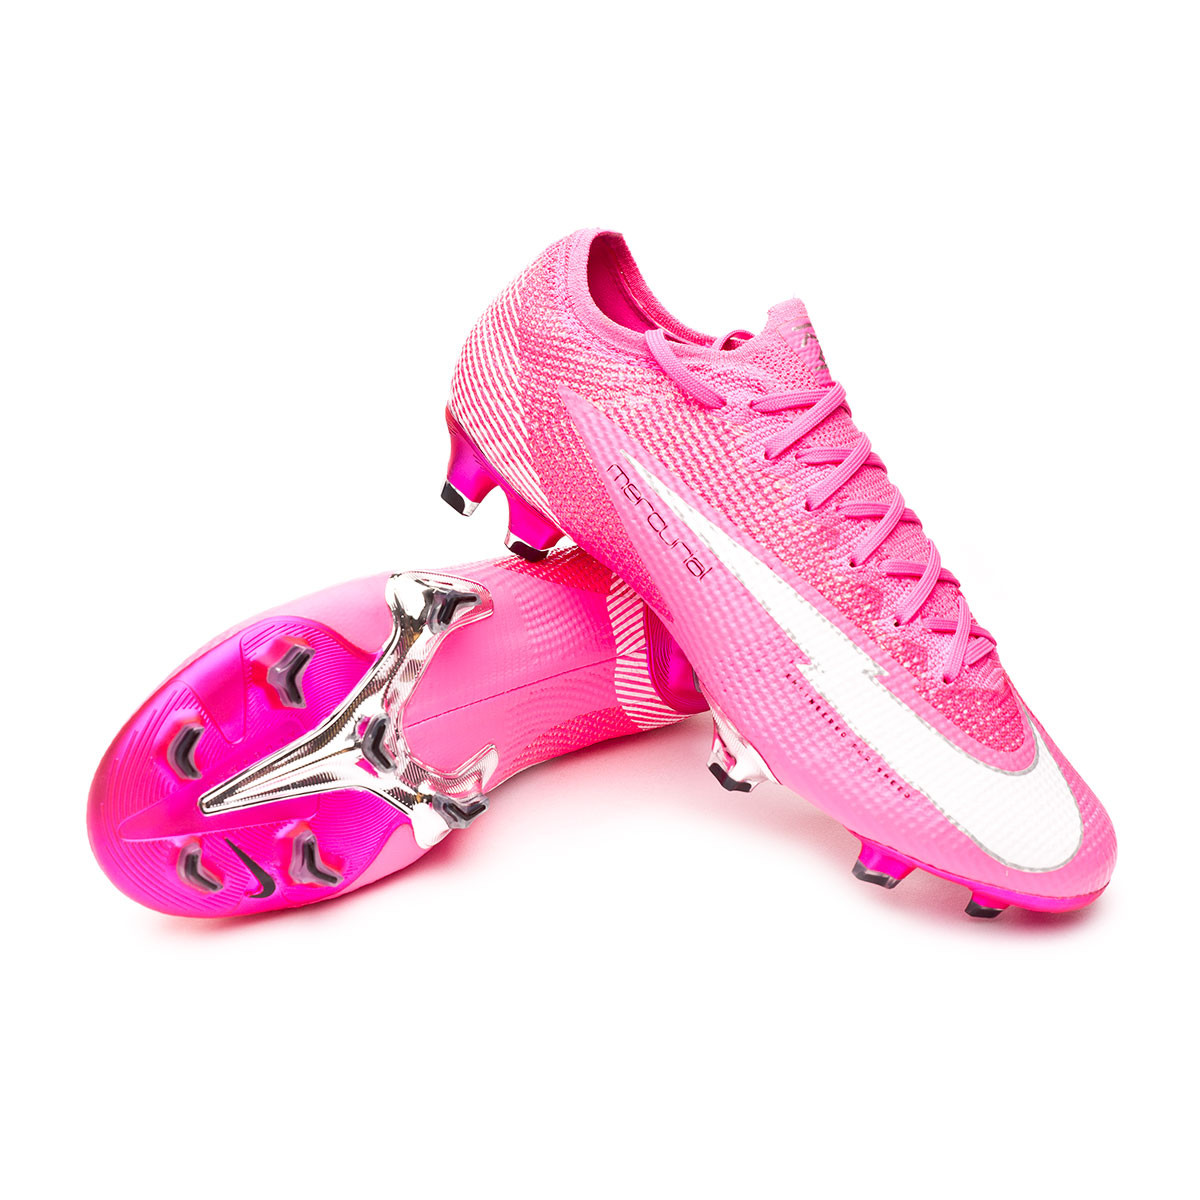 nike boots pink and black